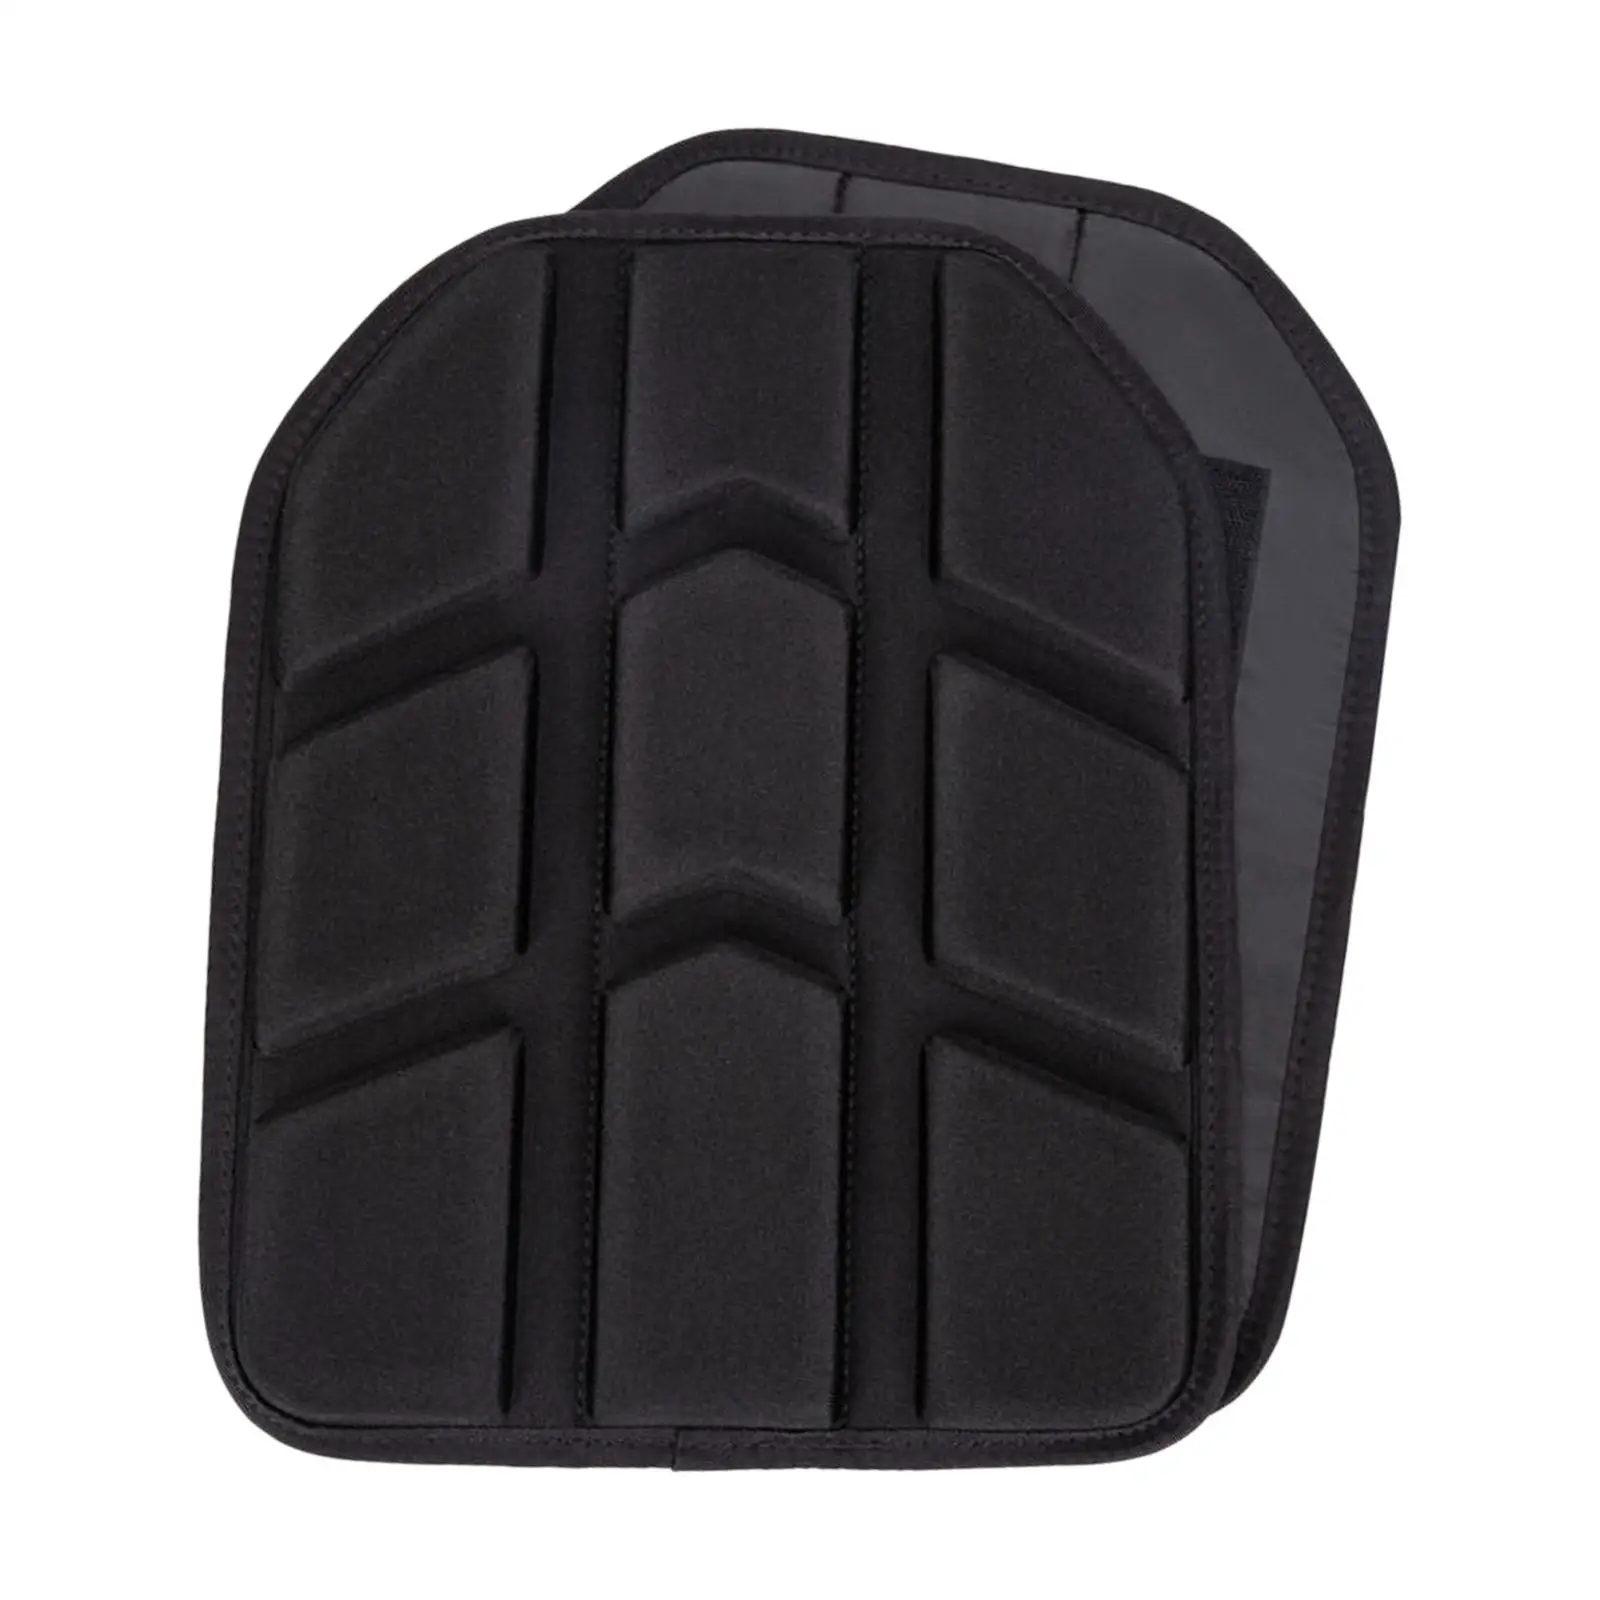 2Piece Vest Plates Removable Lightweight Airsoft Vest Foam Plate Shock Plates for Extreme Play and Adventuring Gear Paintball